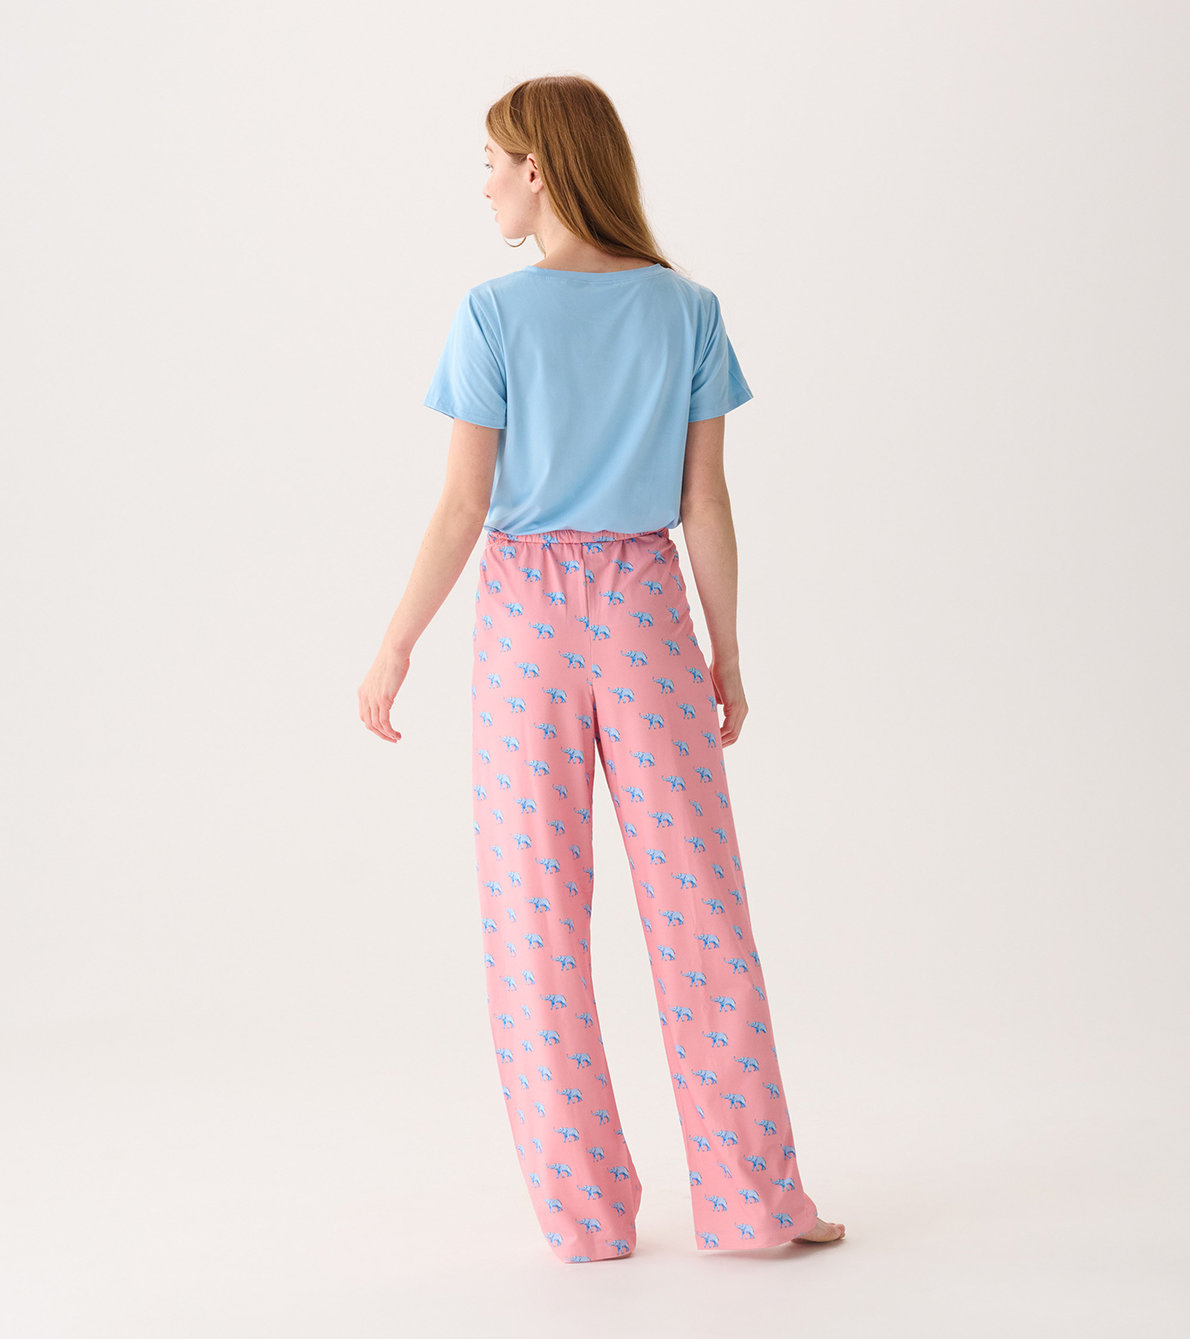 View larger image of Capelton Road Women's Elephantastic T-Shirt and Pants